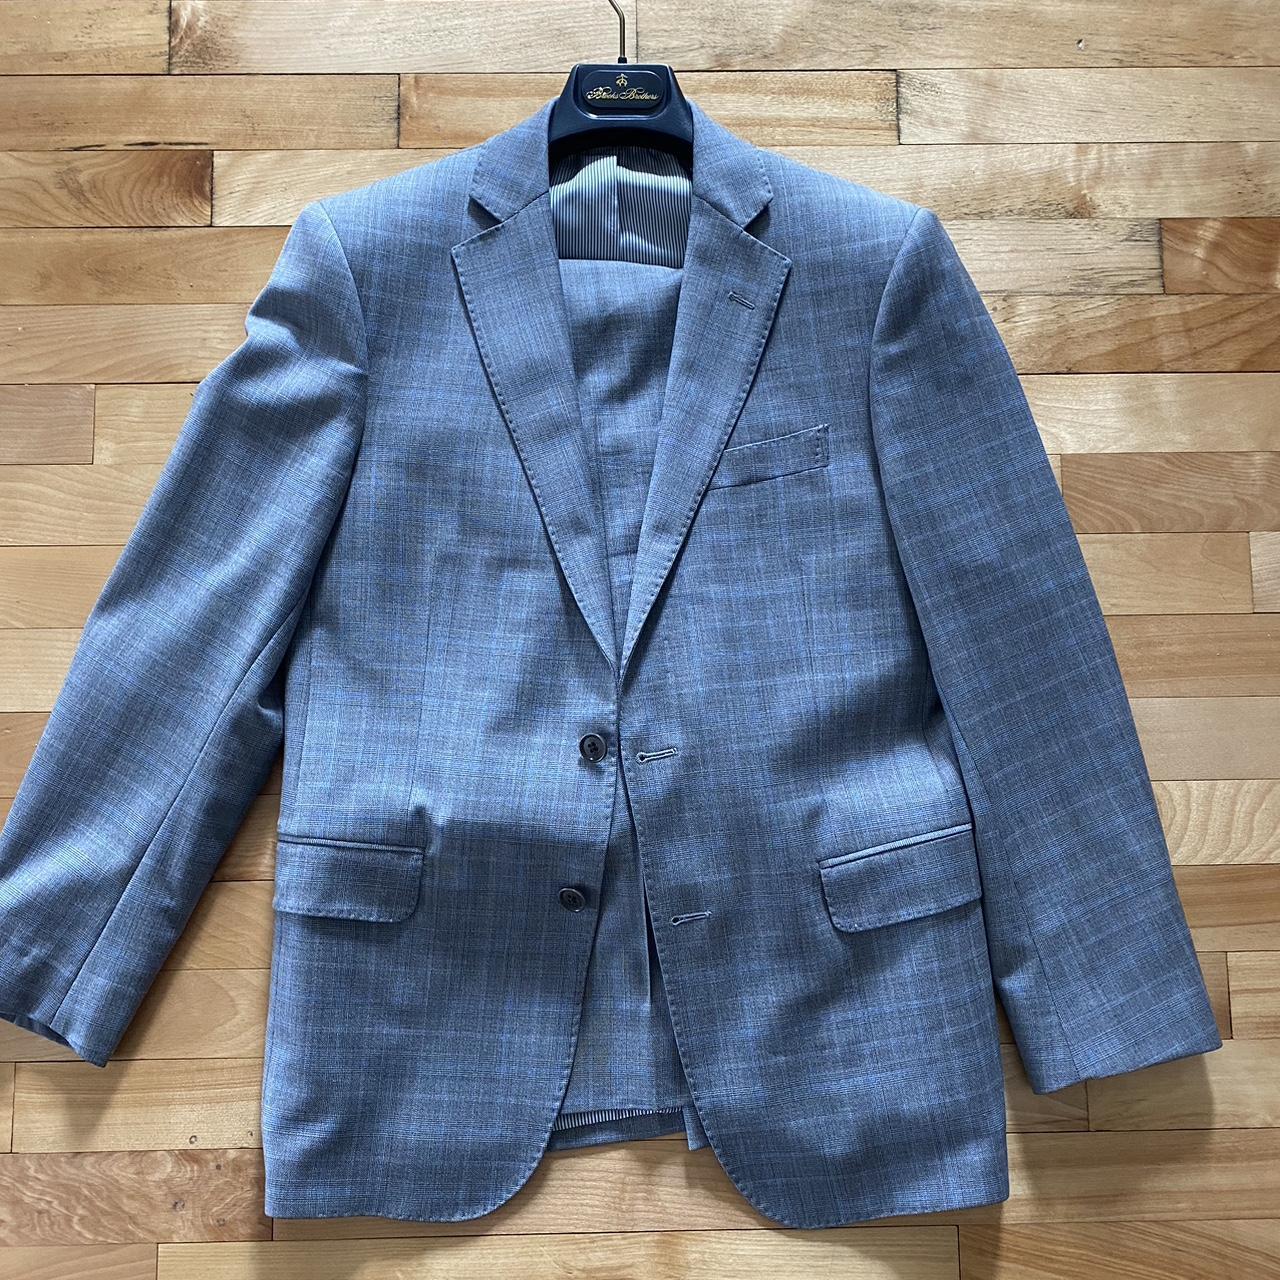 Brooks Brothers Men's Grey and Silver Suit | Depop